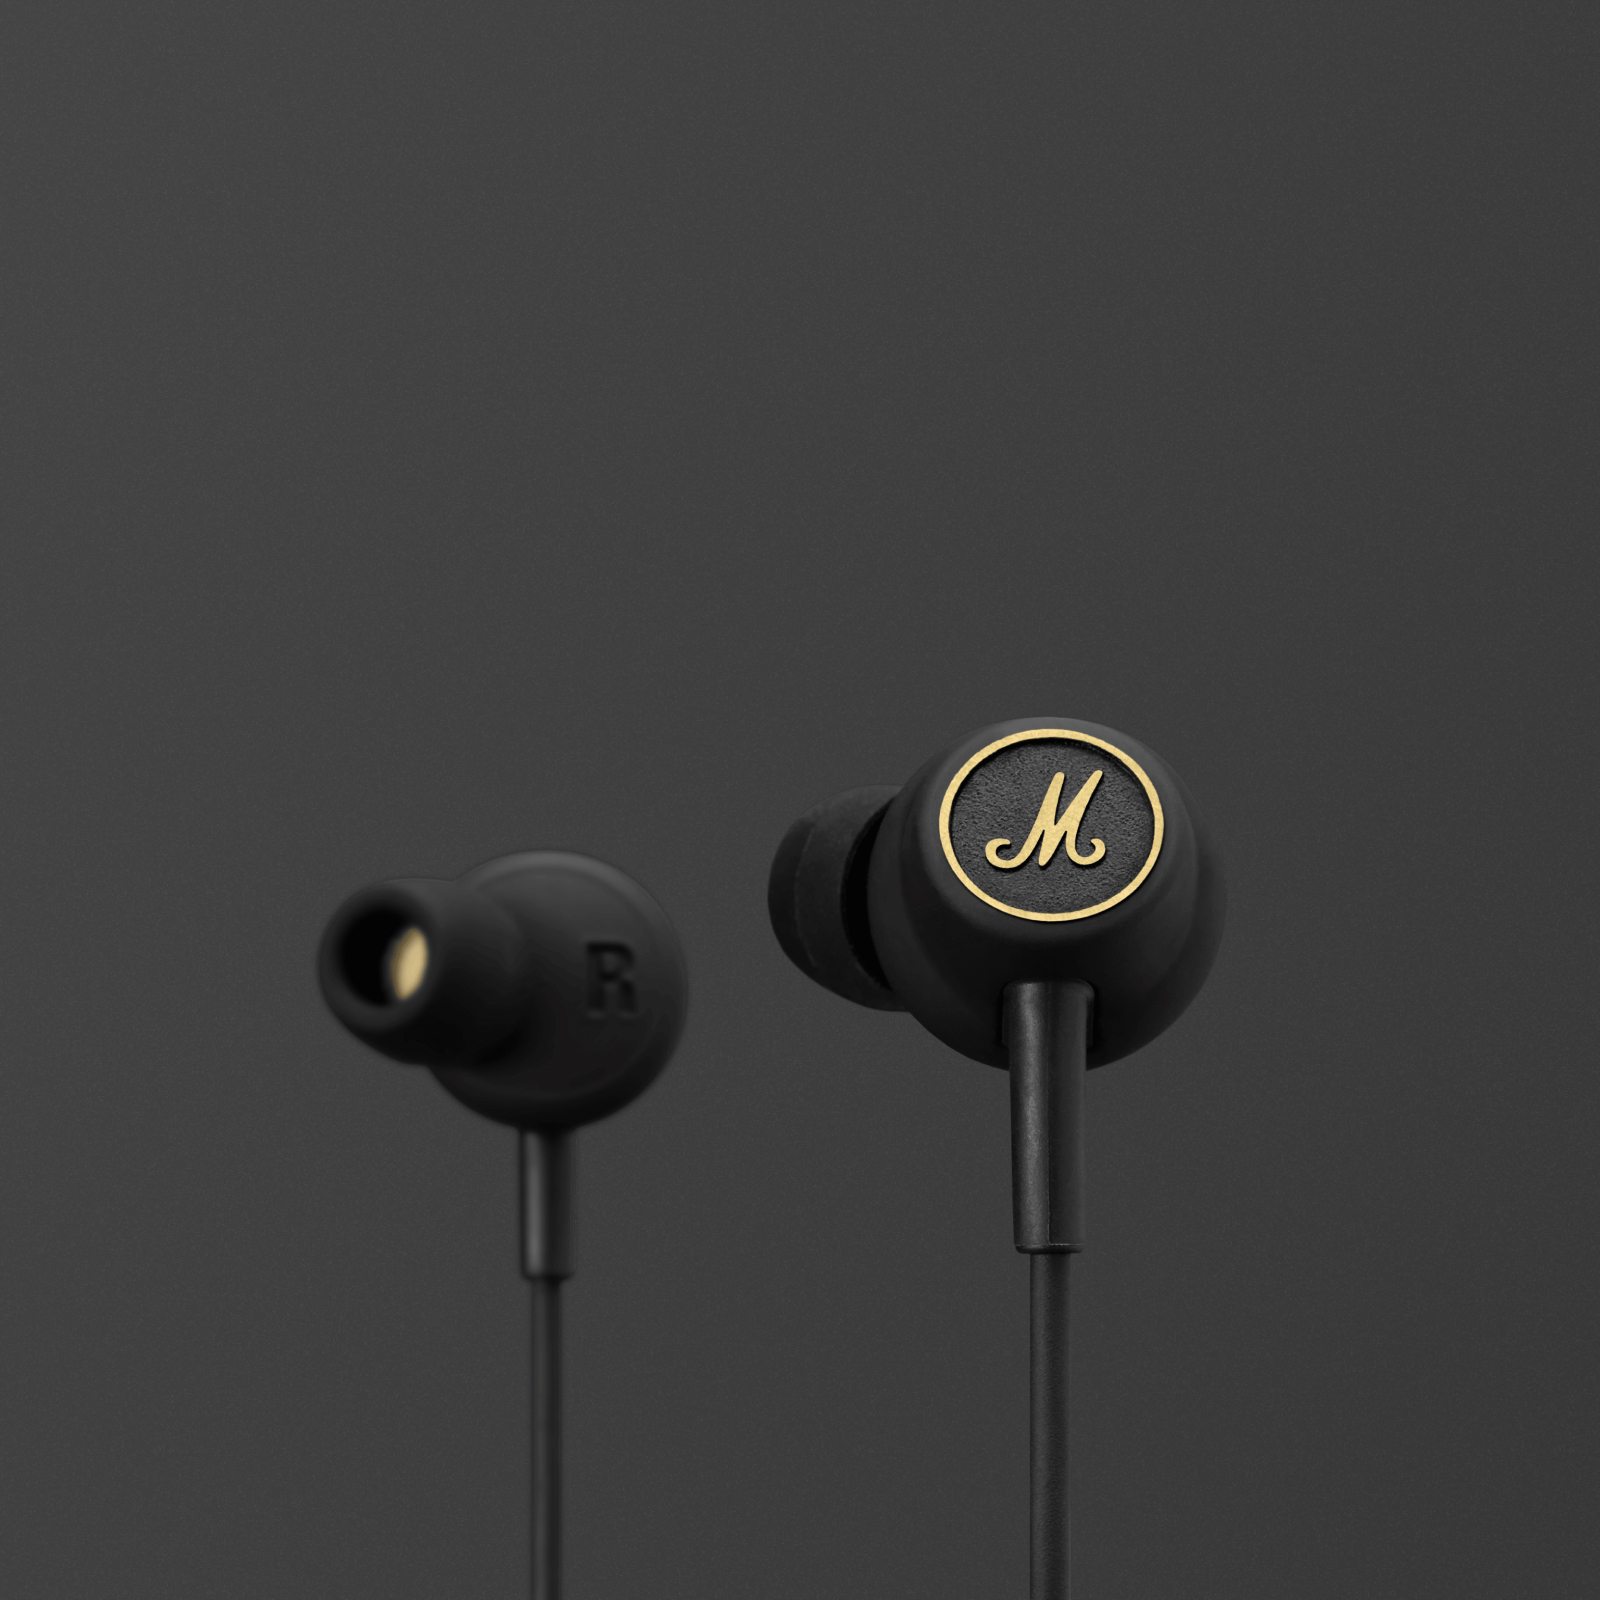 A pair of black Marshall Mode EQ earphones with a gold logo.